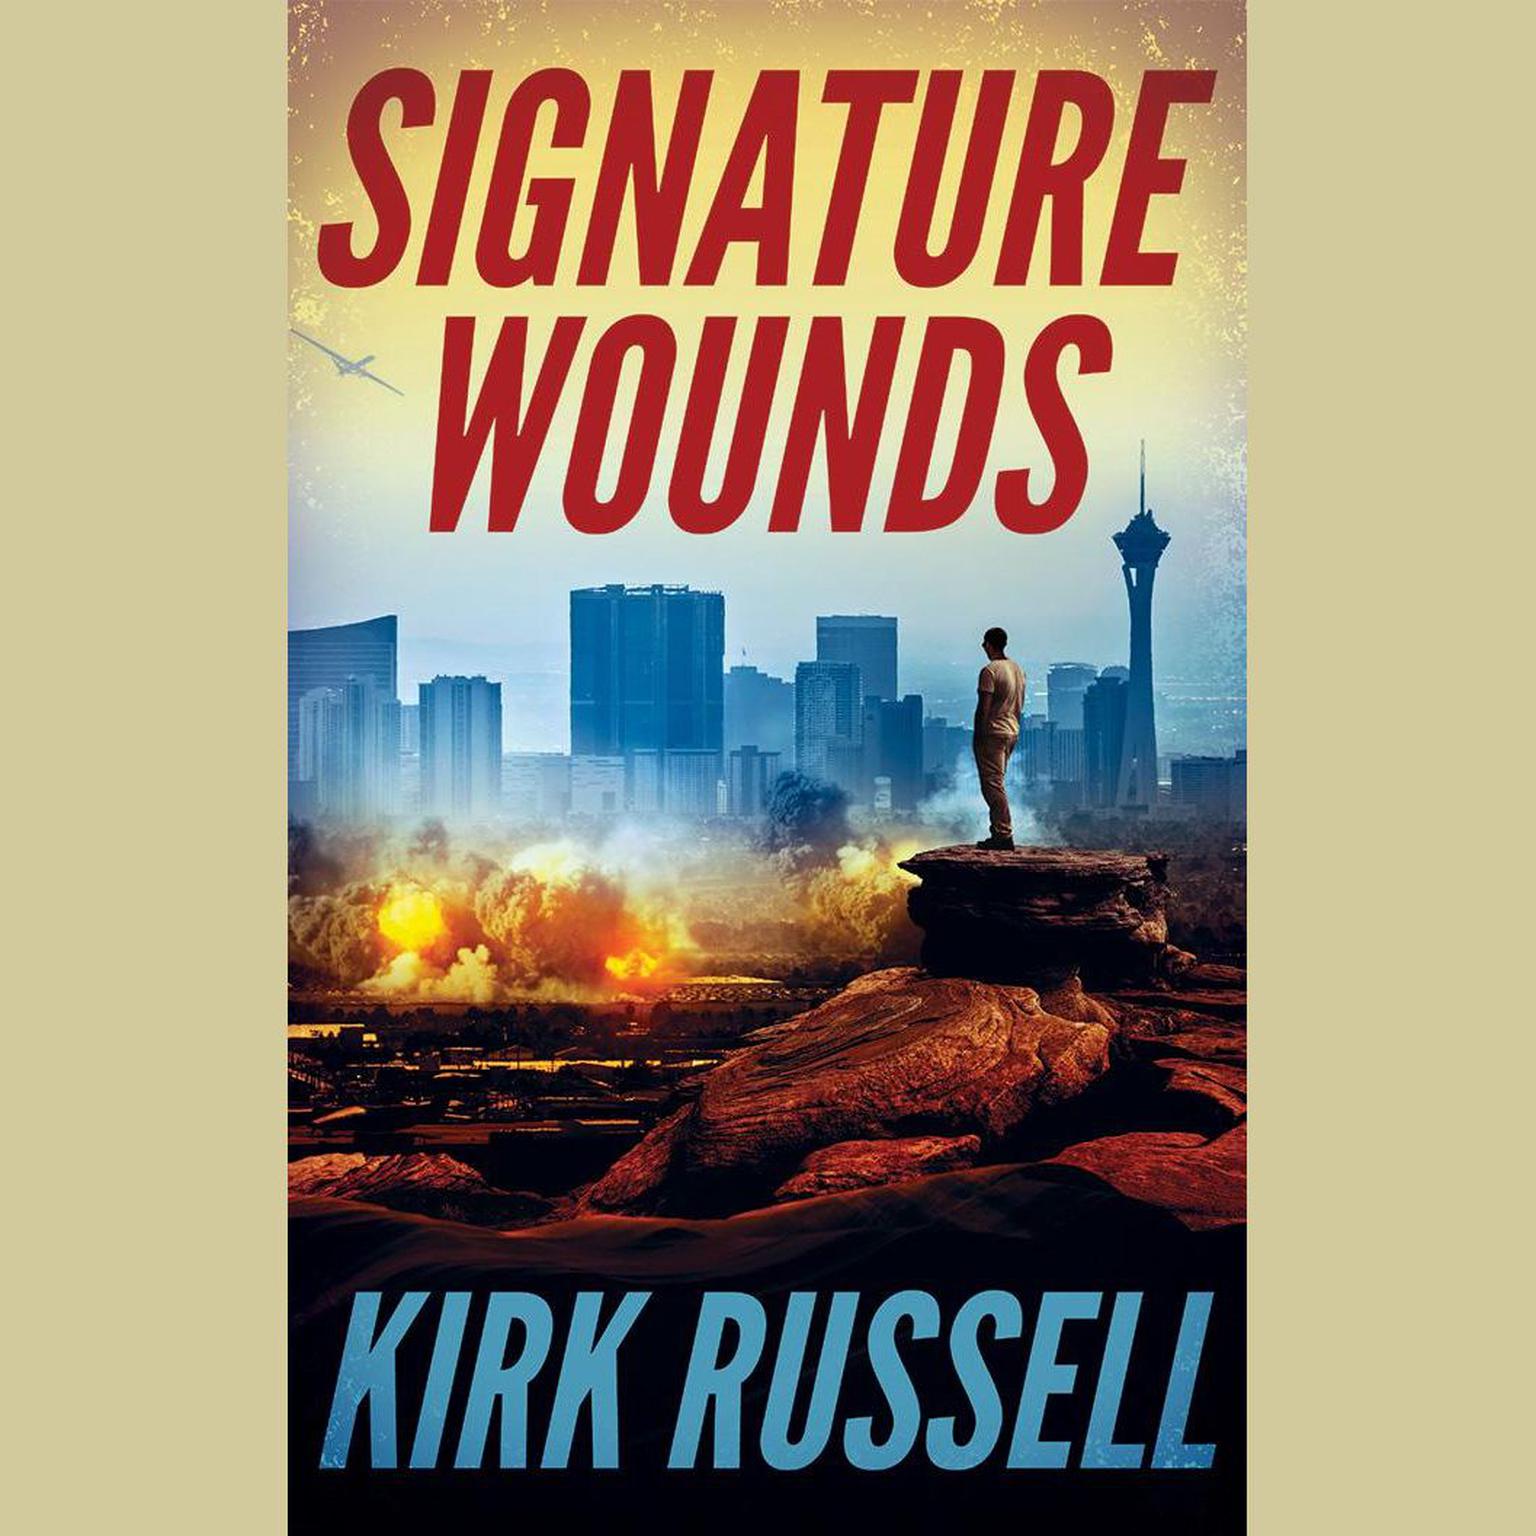 Signature Wounds Audiobook, by Kirk Russell